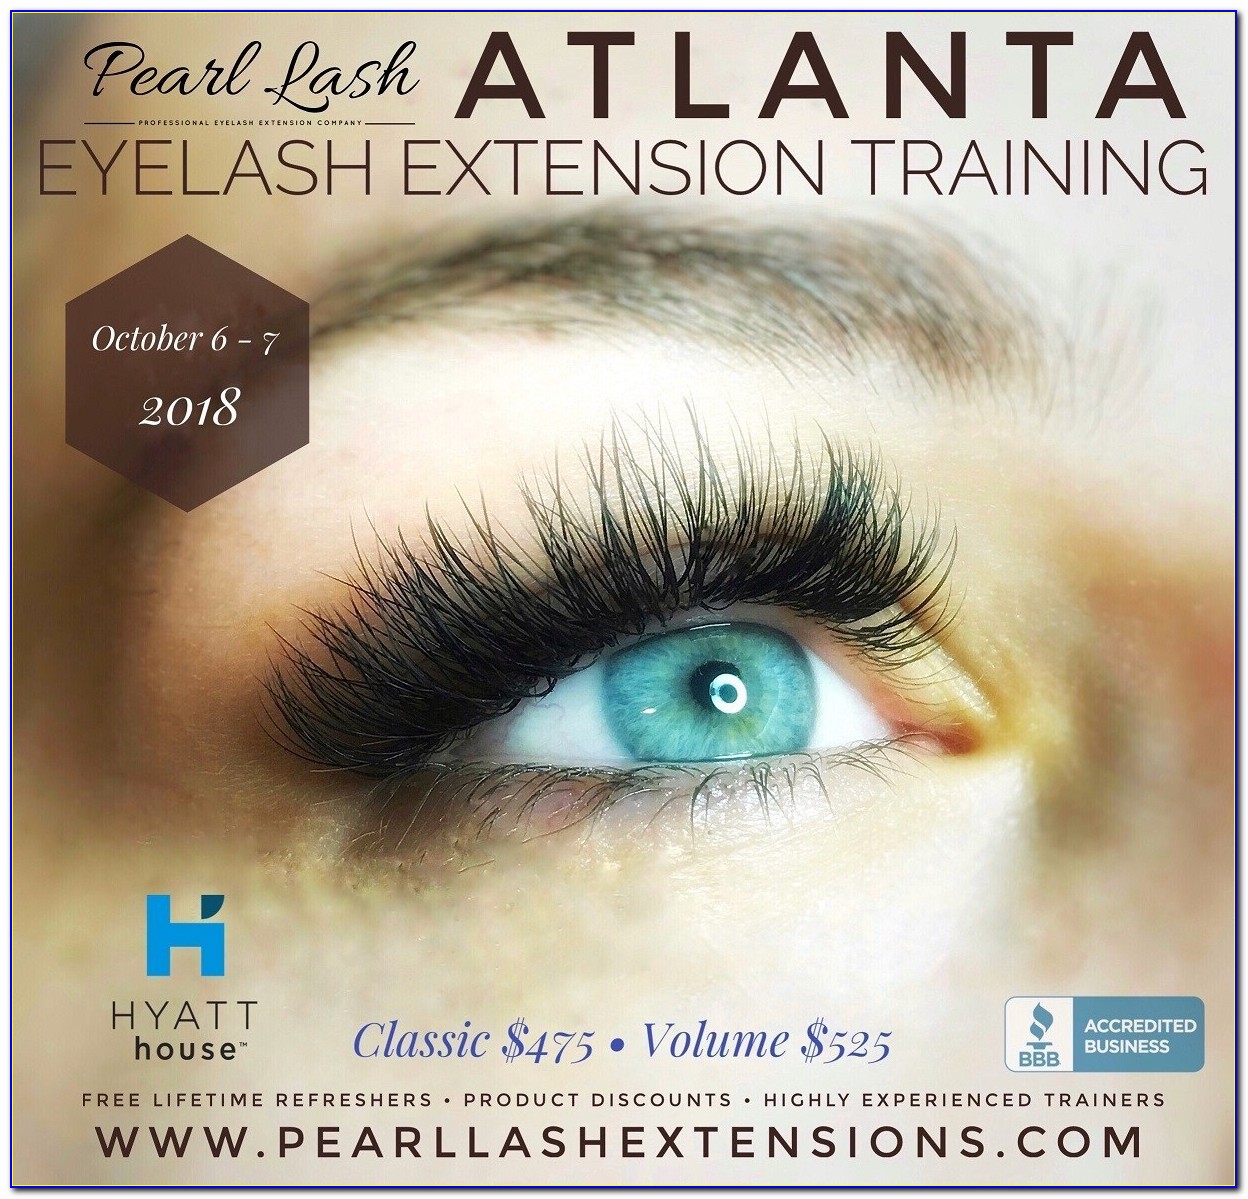 Eyelash Extension Certification Requirements Indiana